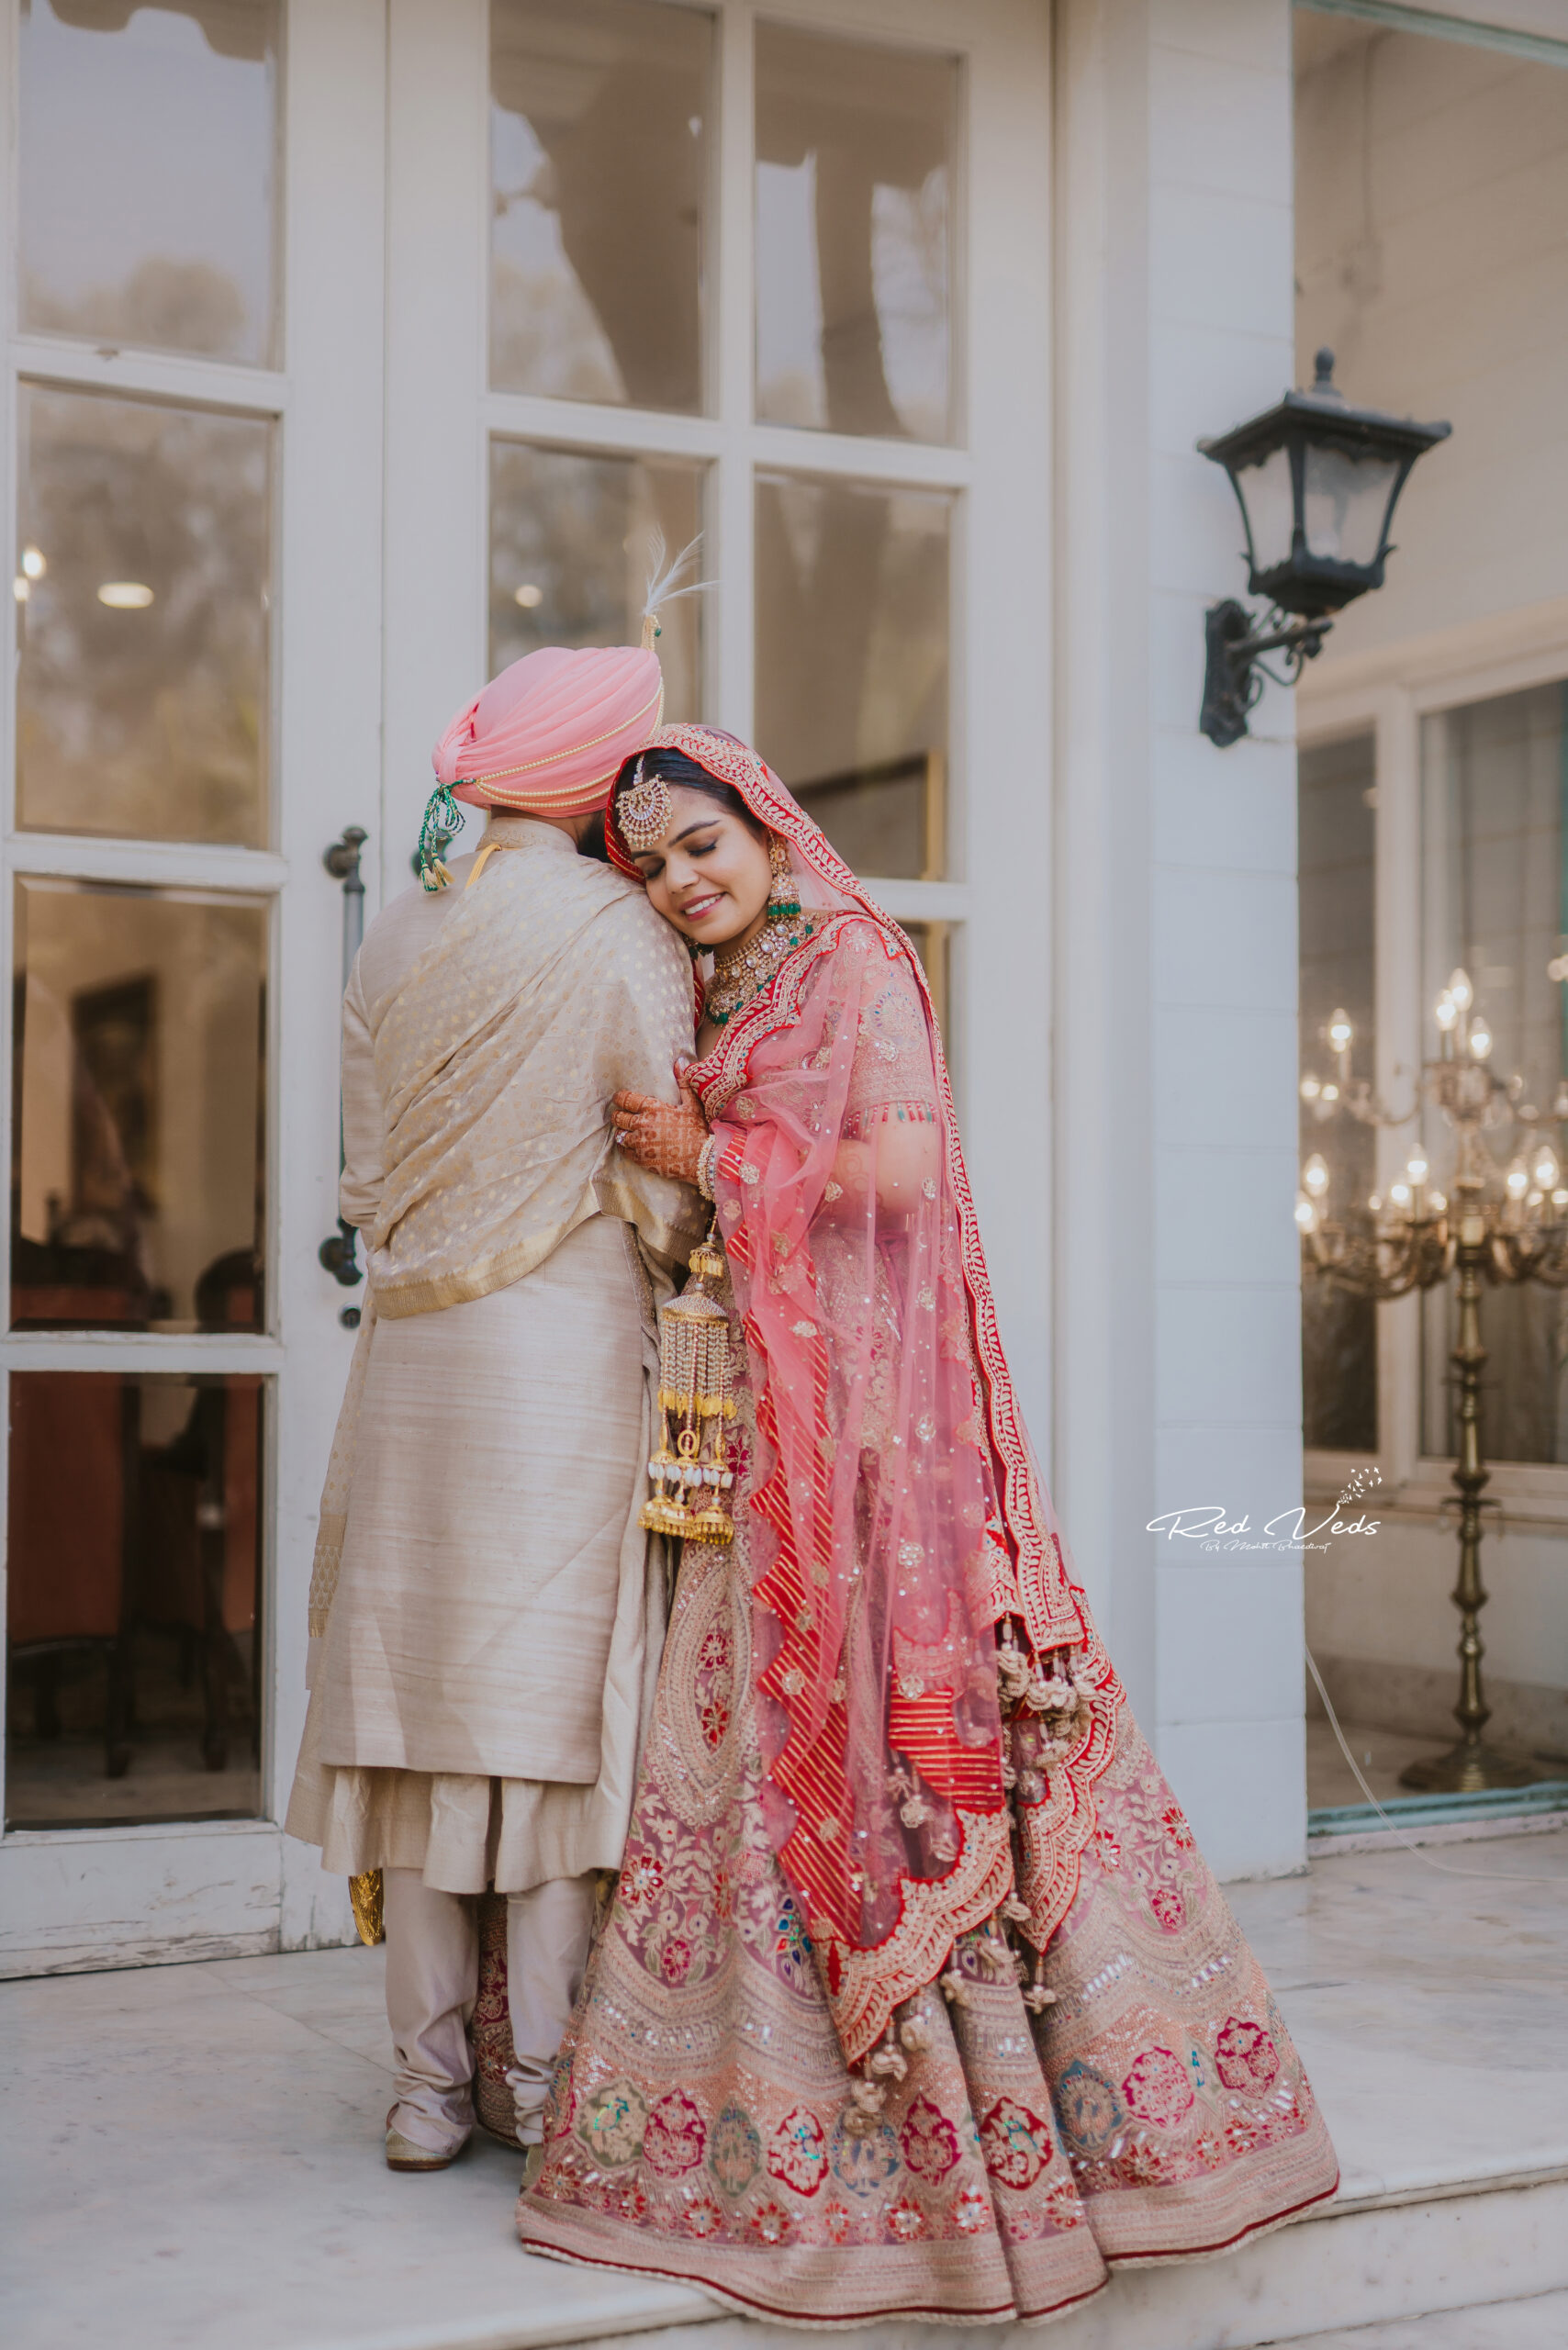 Photo from TRADITIONAL WEDDING STORIES collection by Wedding Elements … |  Indian wedding photography poses, Indian wedding photography couples,  Wedding couple poses